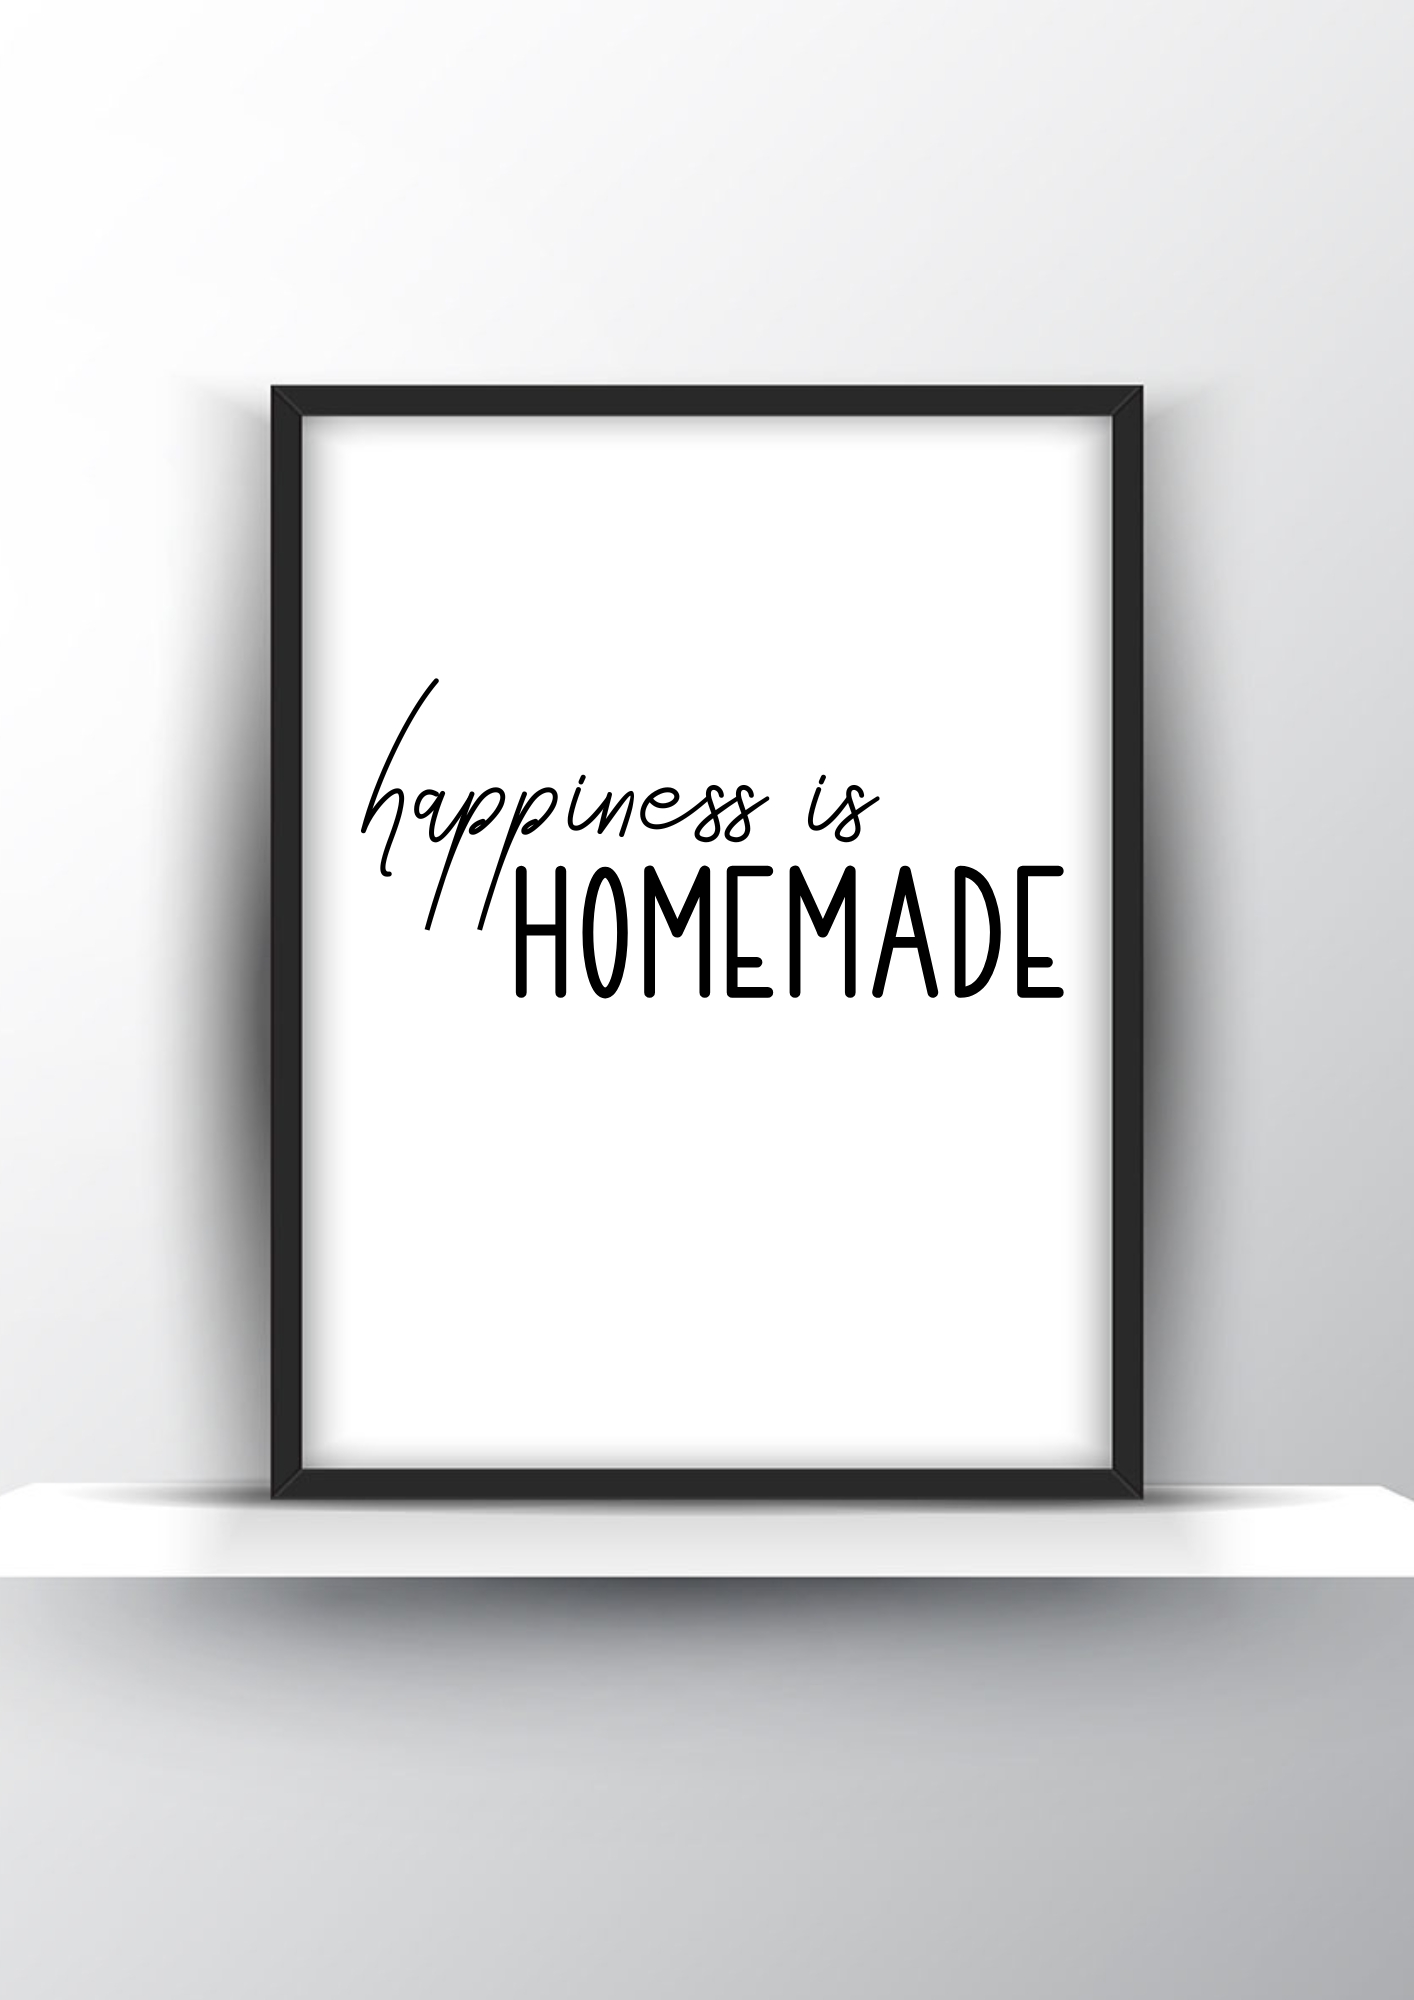 Happiness is Homemade Printable Wall Art - Entry Room Wall Art - Home Decor - Digital Download